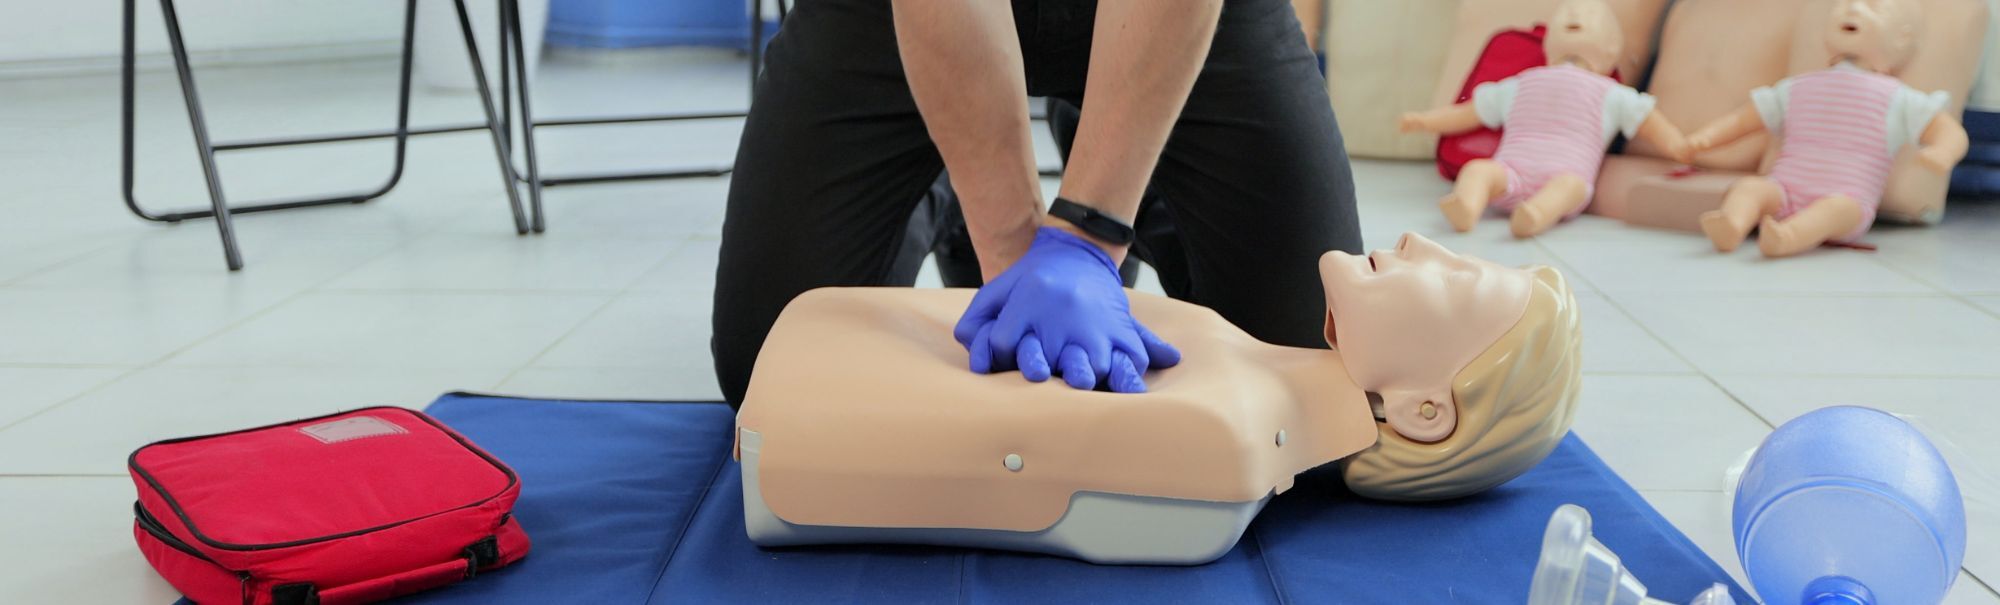 St. John Ambulance Standard First Aid/CPR Level C AED